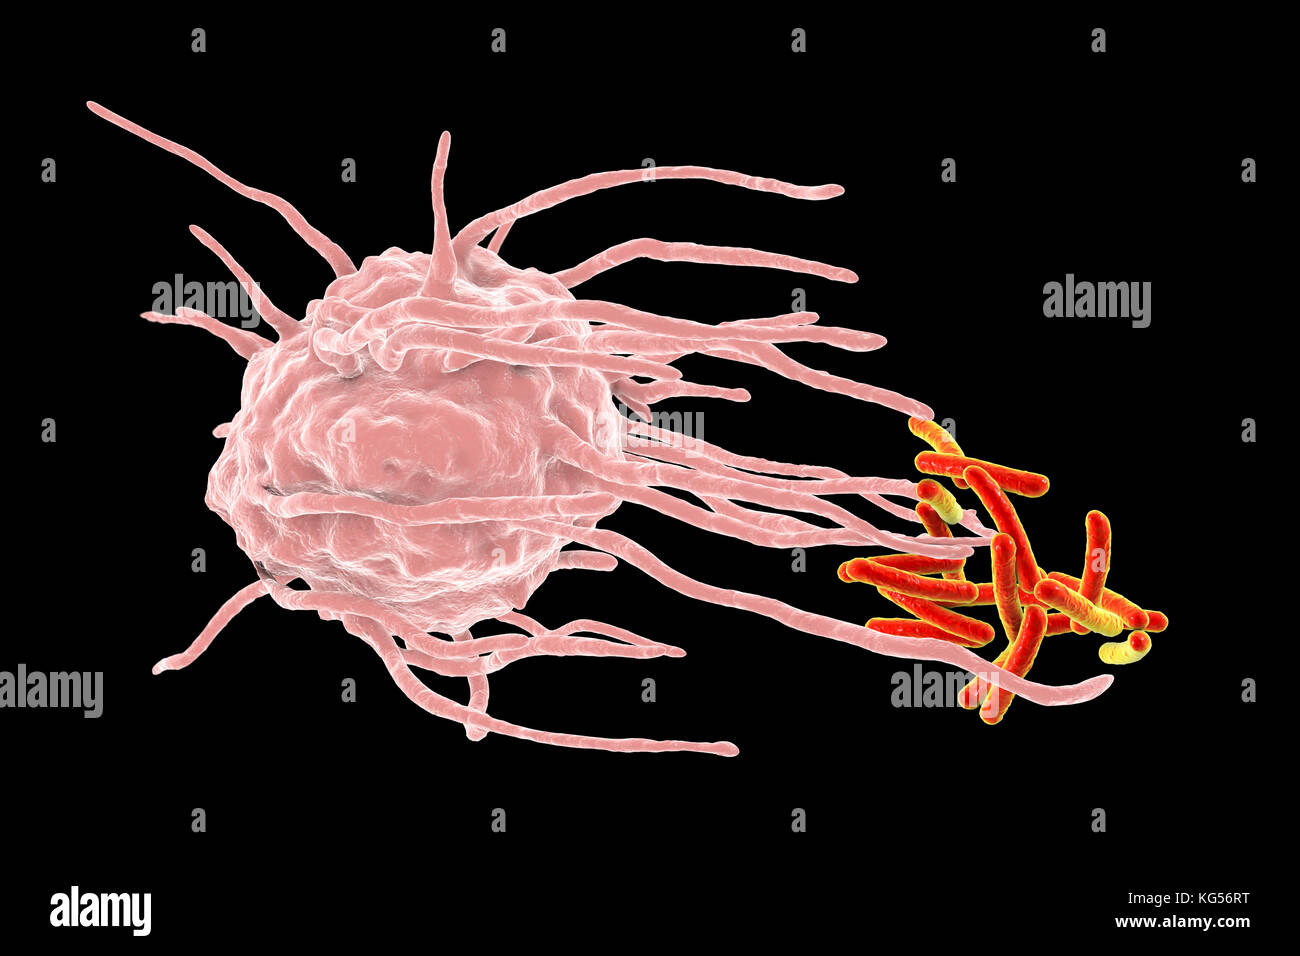 Macrophage engulfing TB bacteria. Computer illustration of a macrophage white blood cell (pink) engulfing tuberculosis (Mycobacterium tuberculosis) bacteria (orange). This process is called phagocytosis. Macrophages are cells of the body's immune system. They phagocytose and destroy pathogens, dead cells and cellular debris. Stock Photo